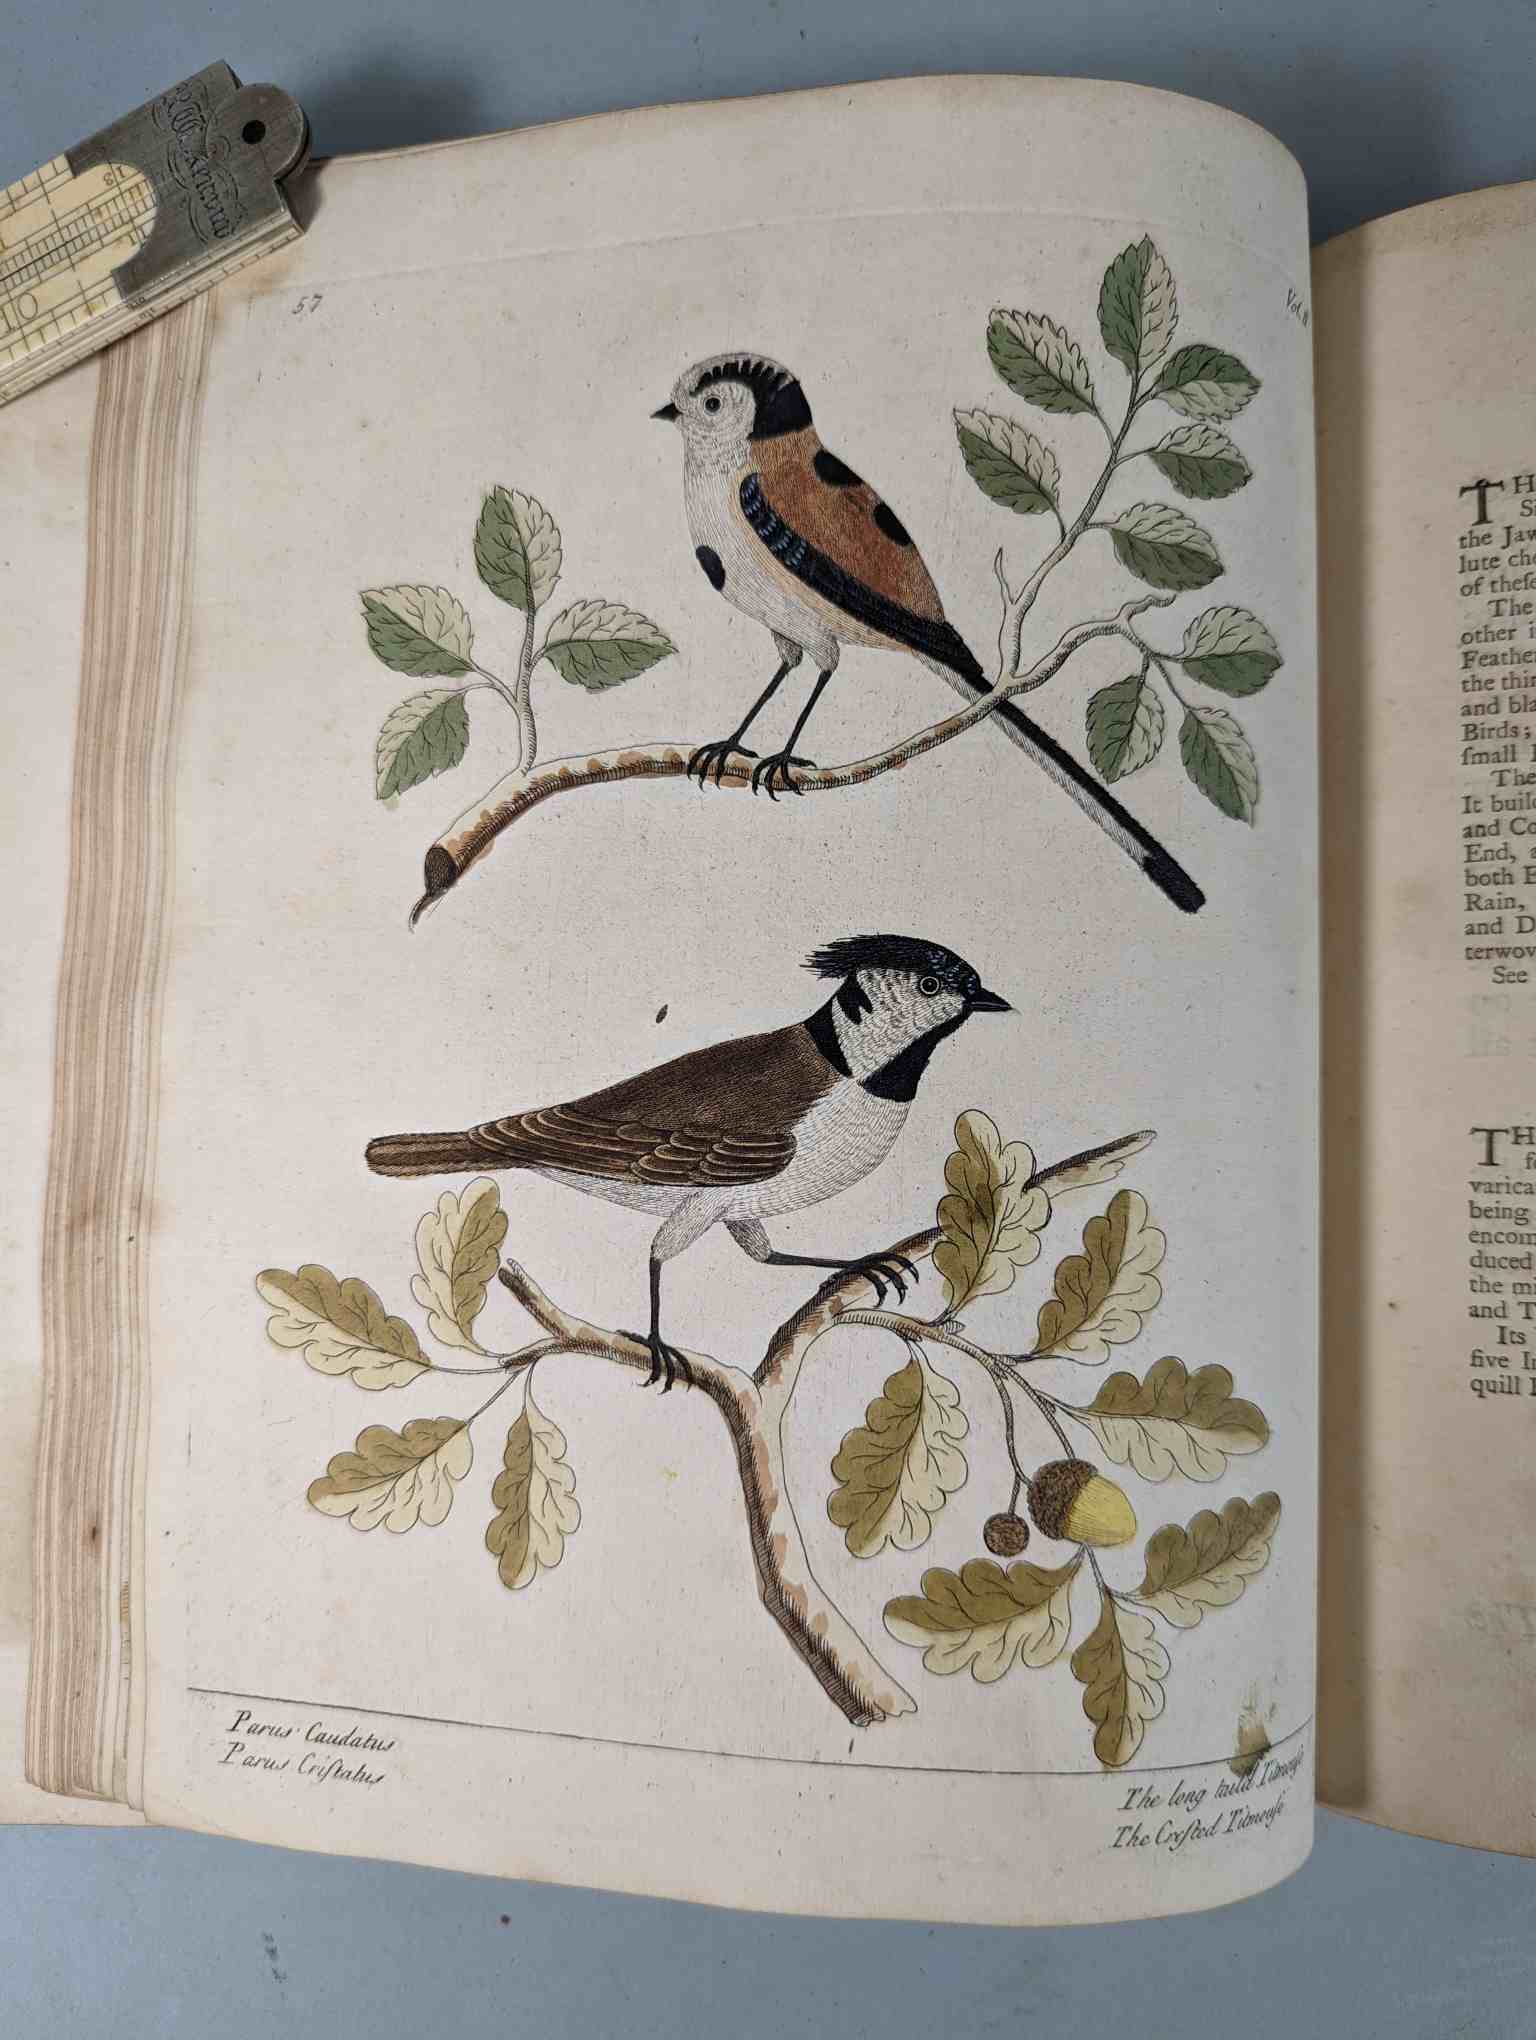 ALBIN, Eleazar. A Natural History of Birds, to which are added, Notes and Observations by W. - Image 161 of 208